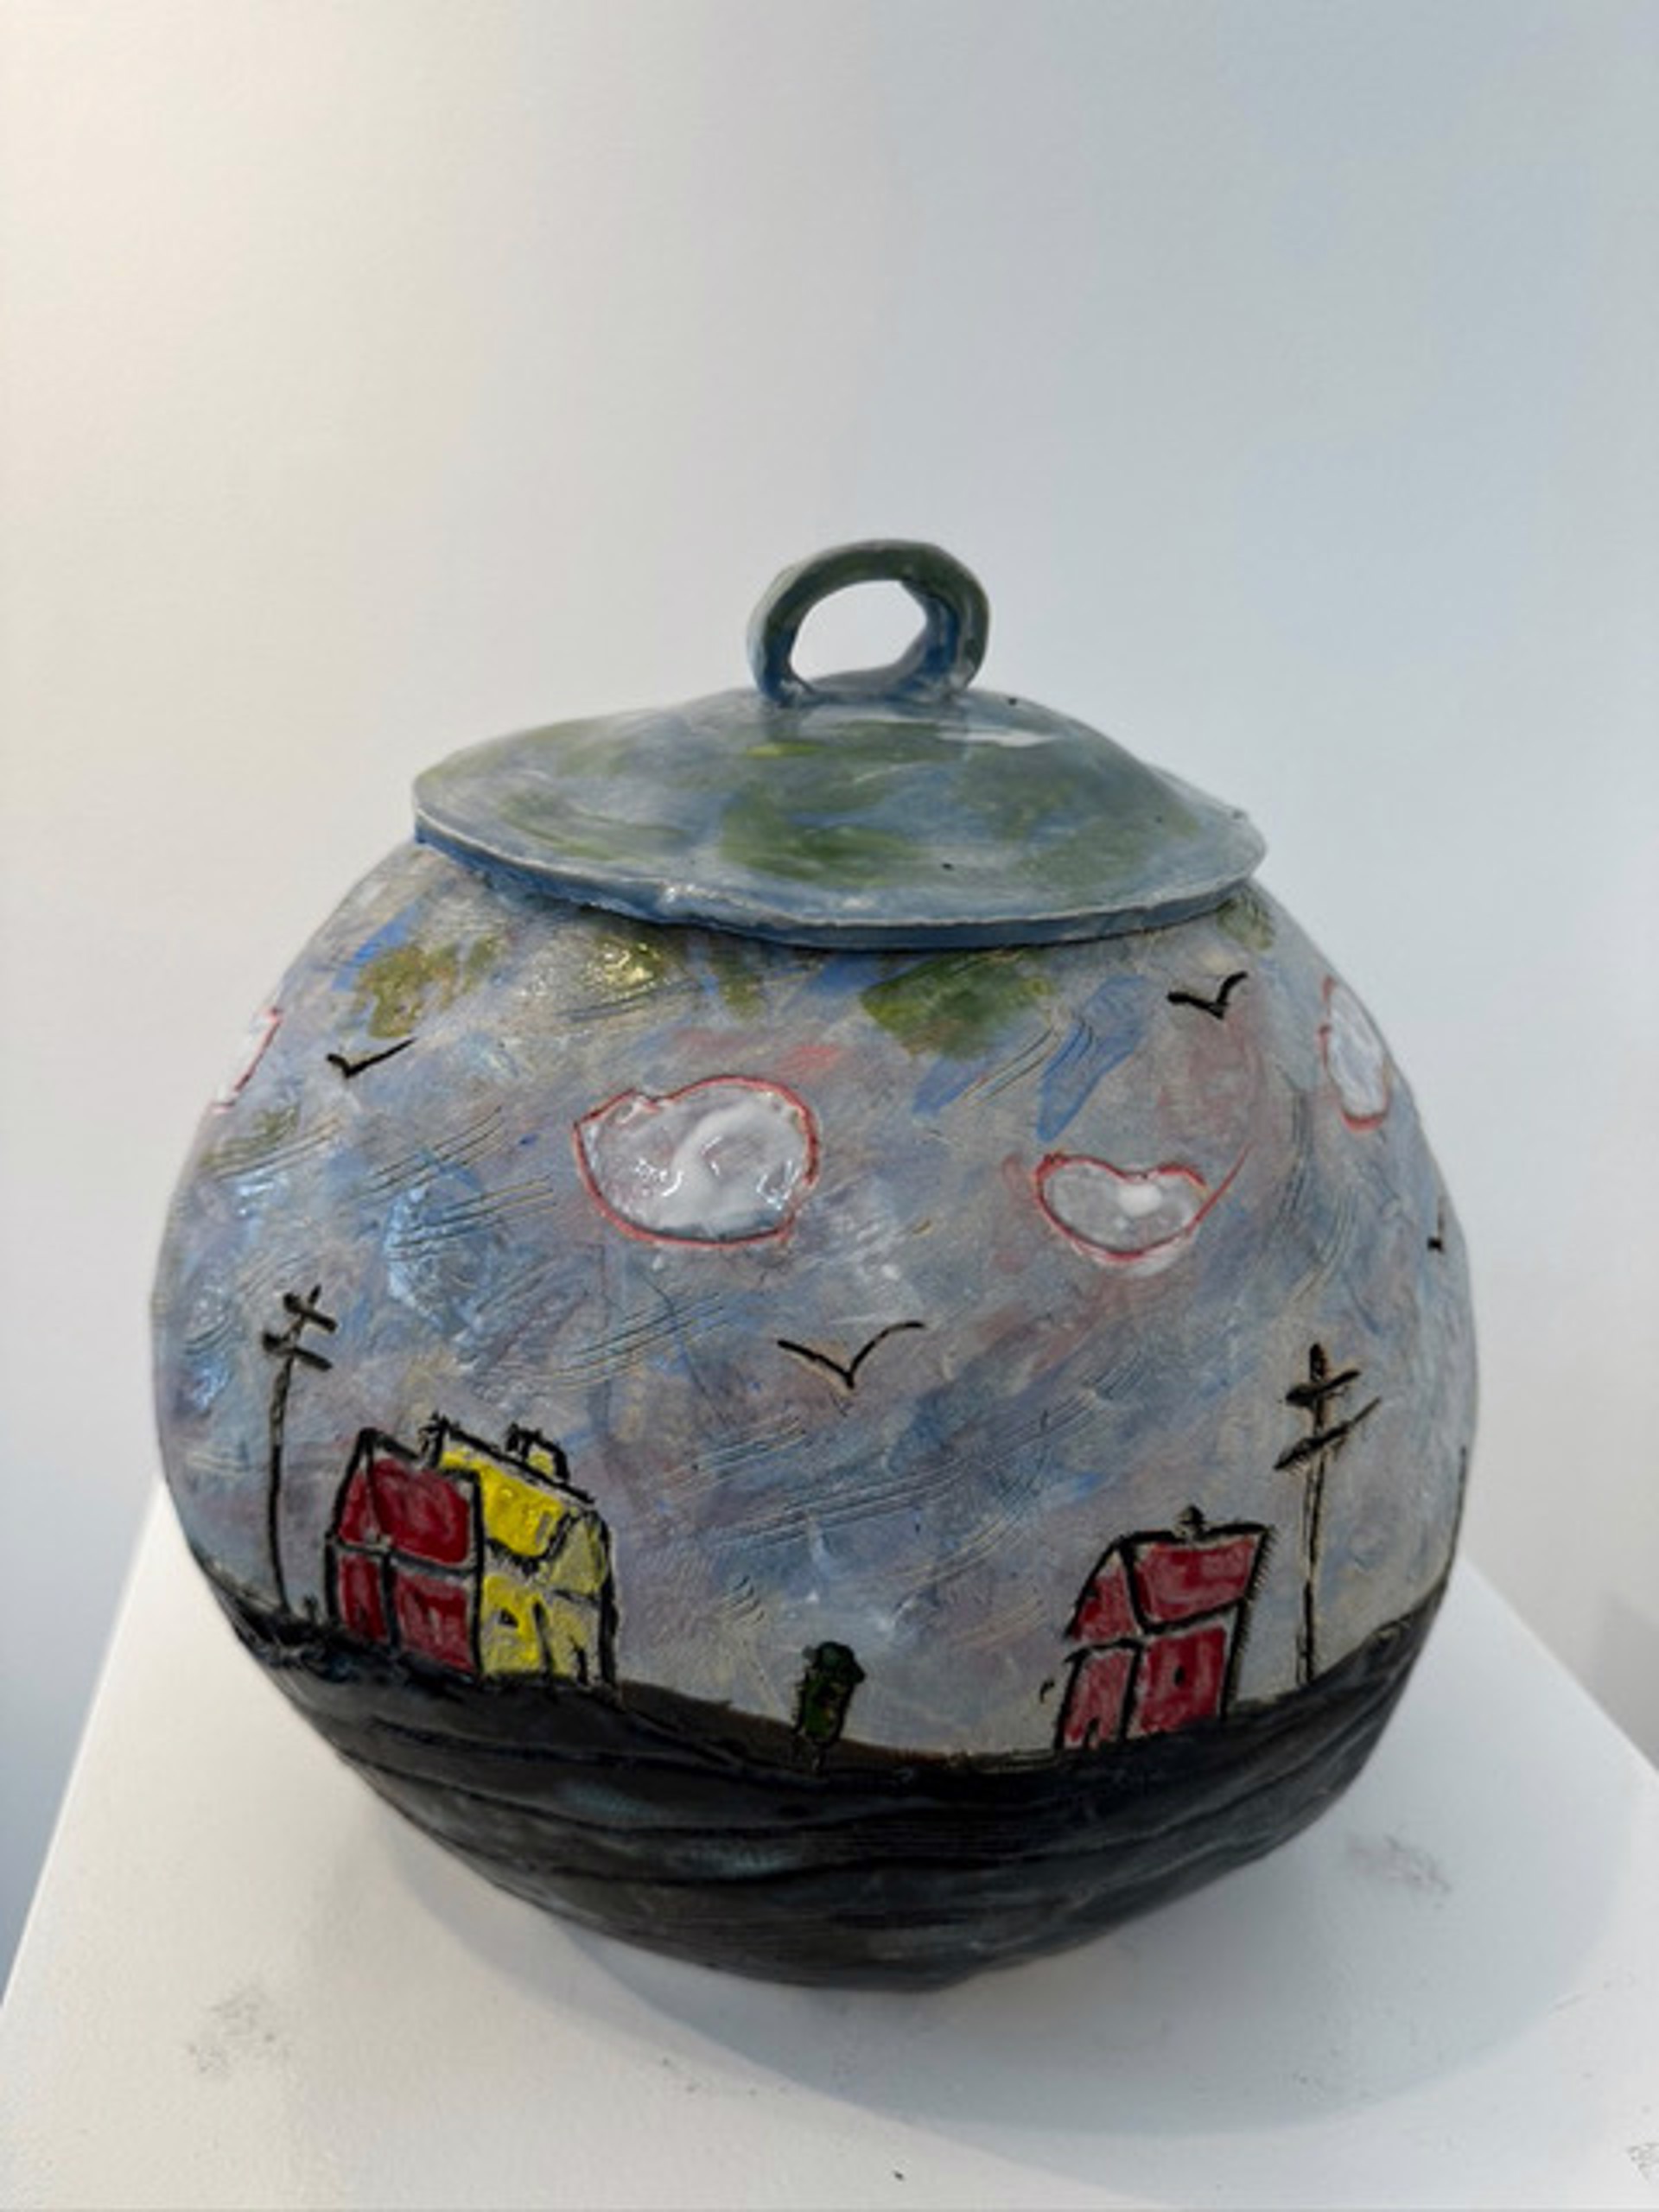 Village Series #8 Vessel Large with Lid by Marian Roth